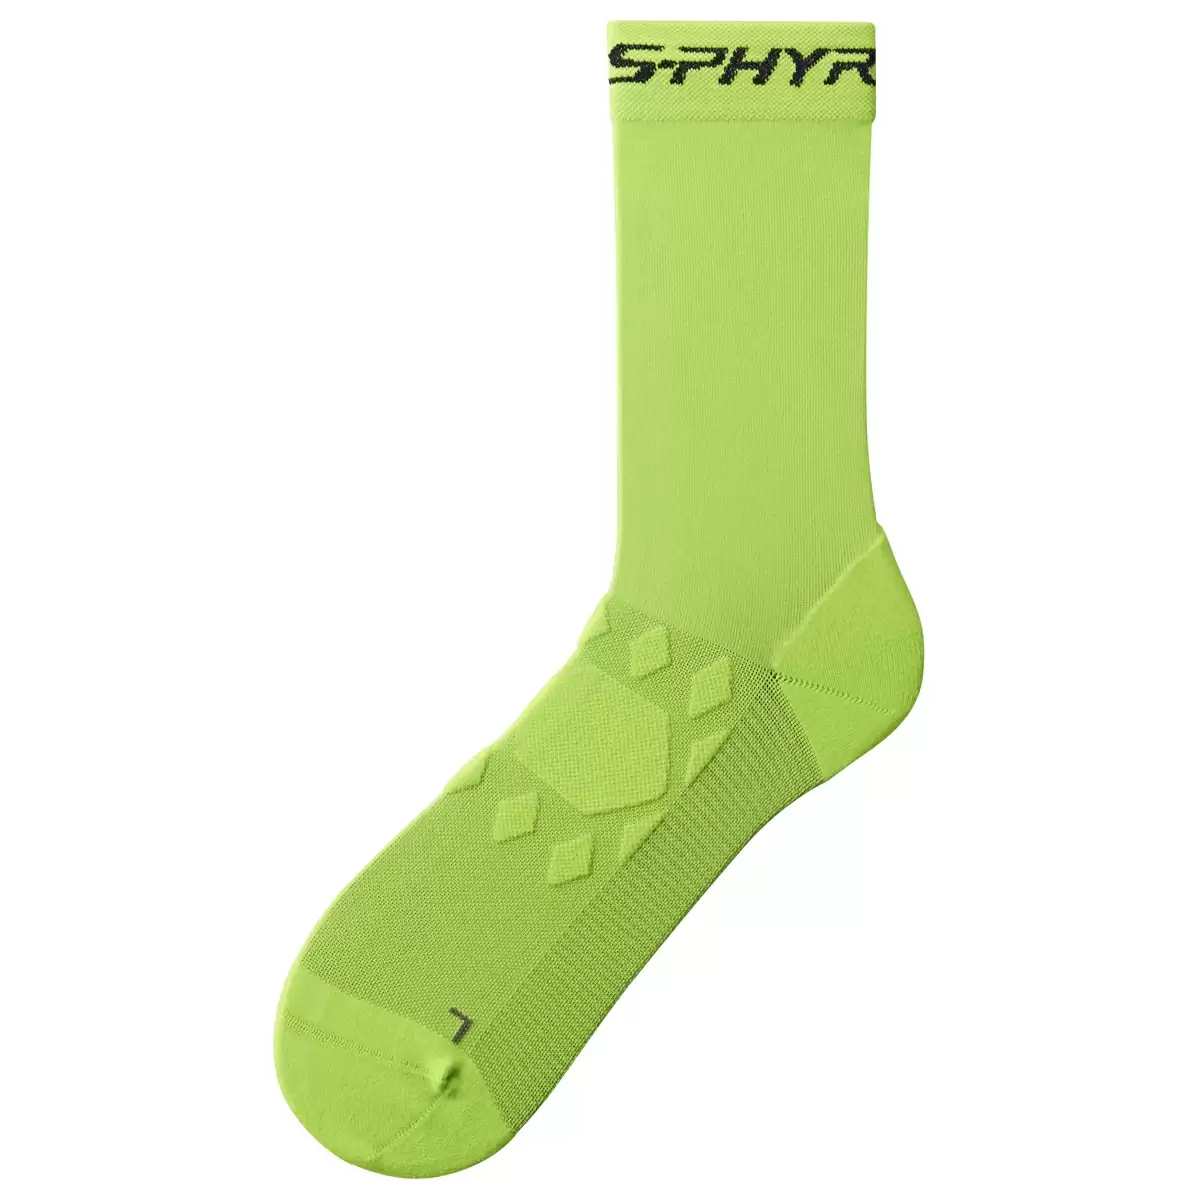 S-Phyre high socks size XL (46-48) green - image